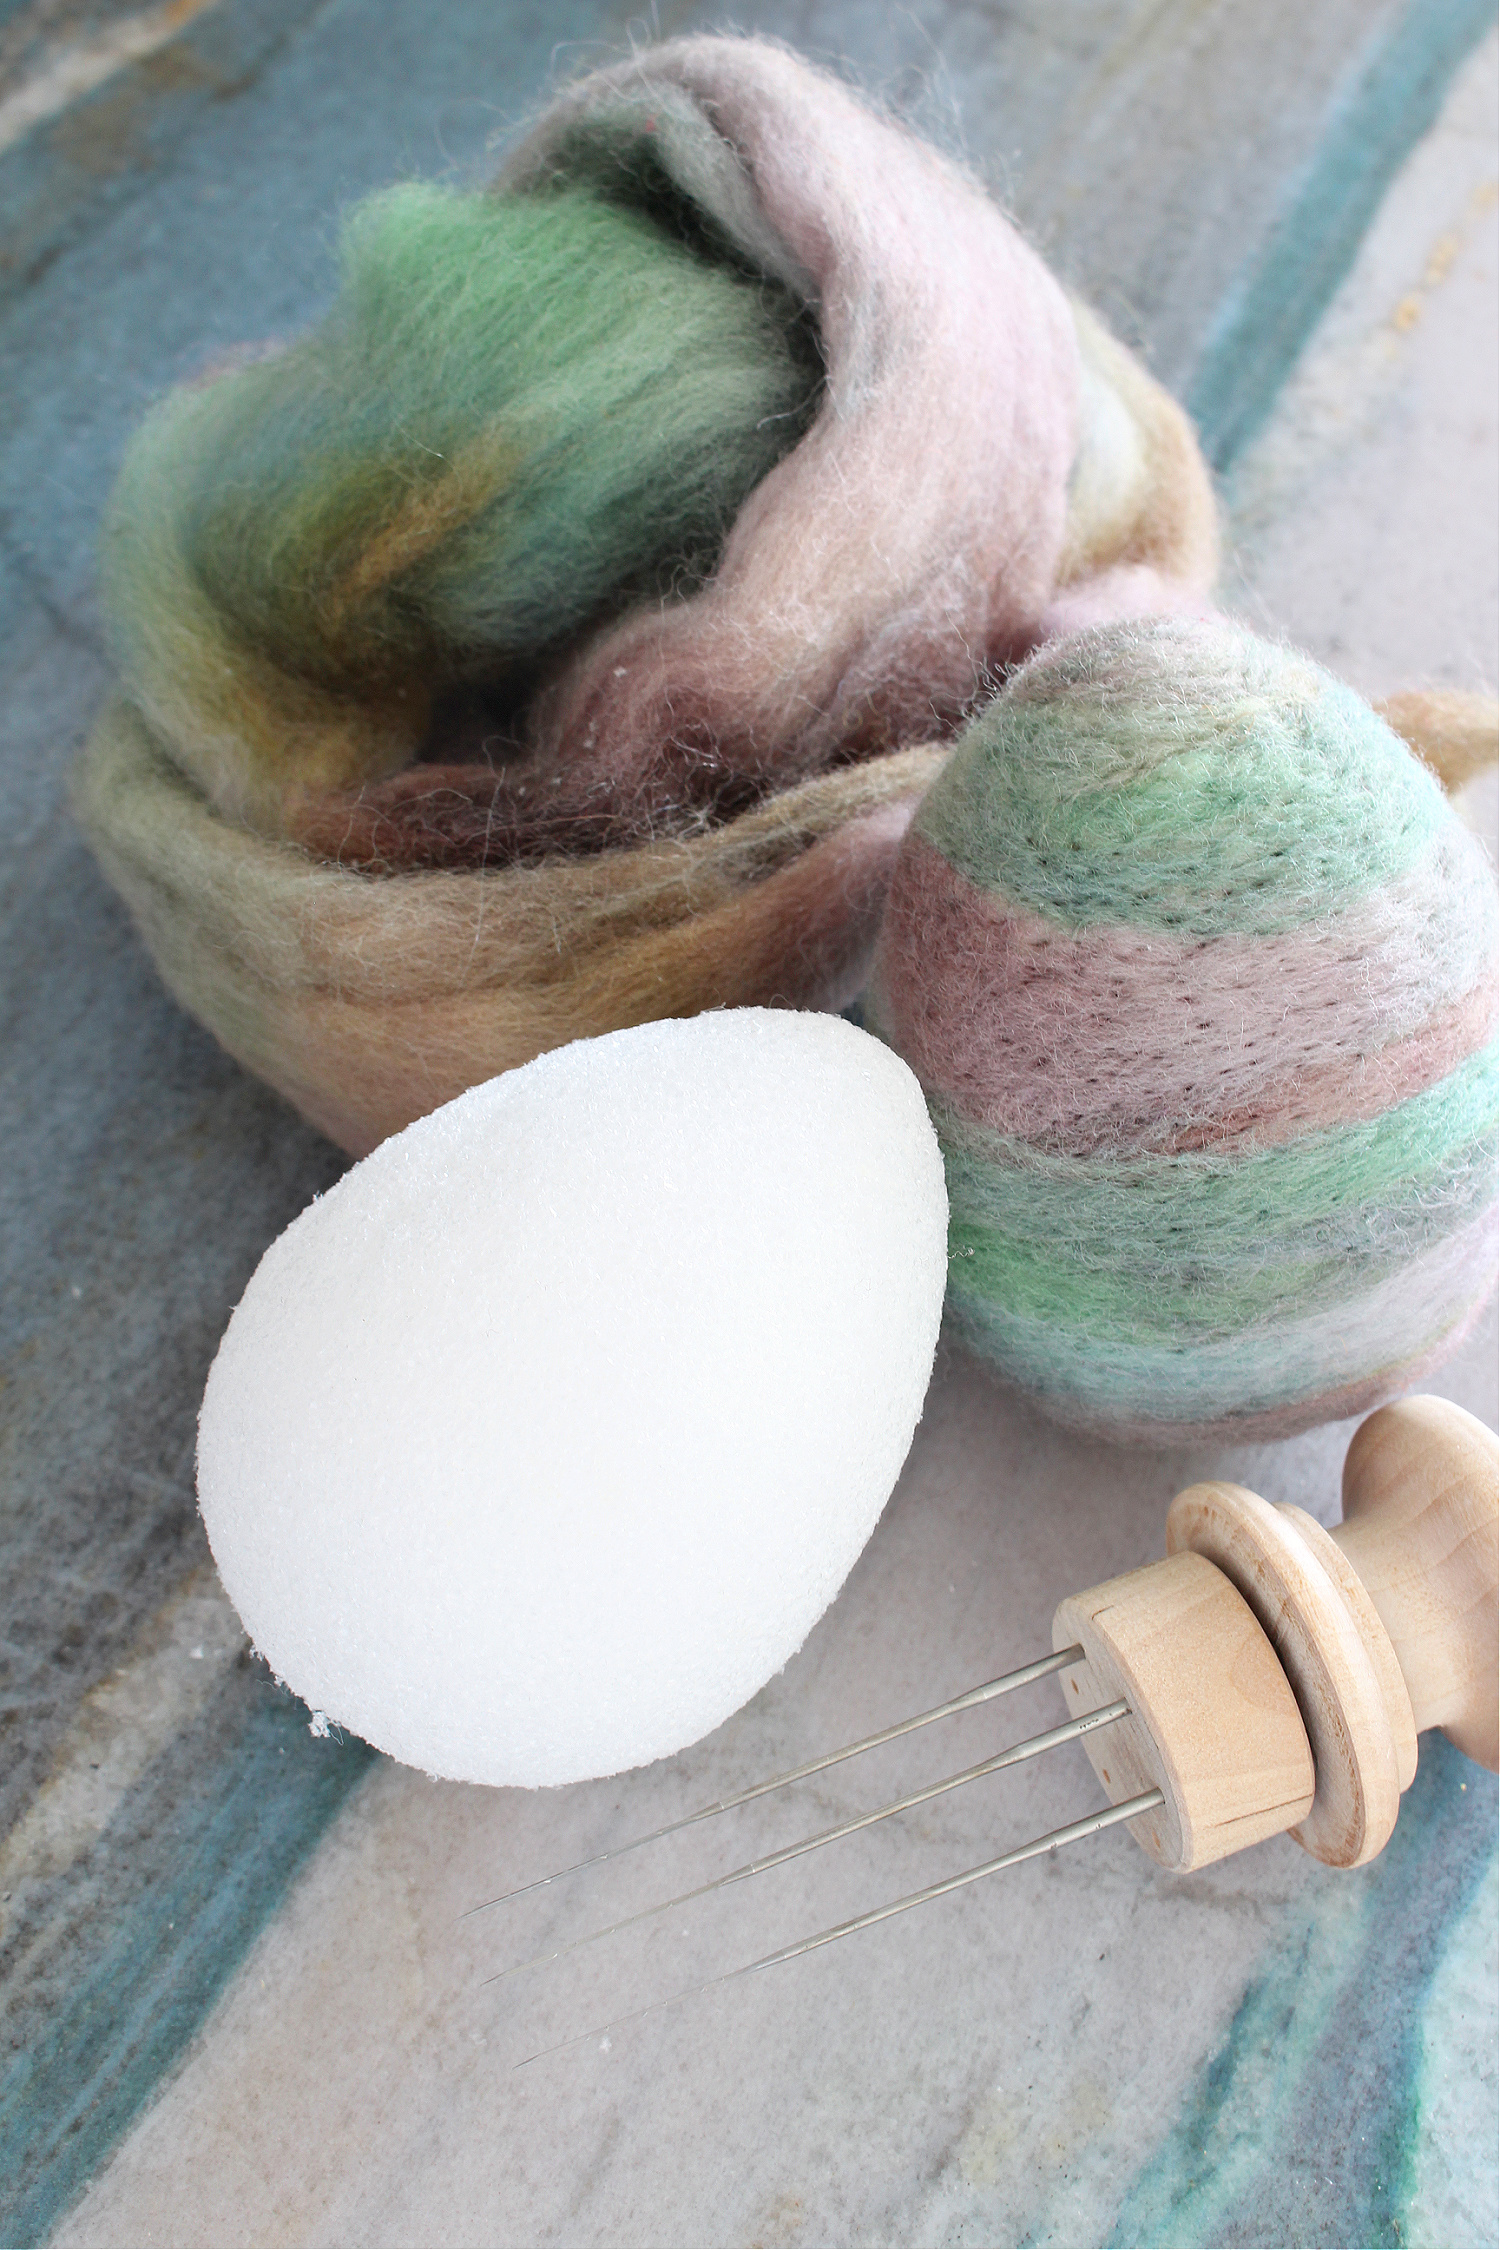 How Do You Make a Needle Felted Easter Egg?